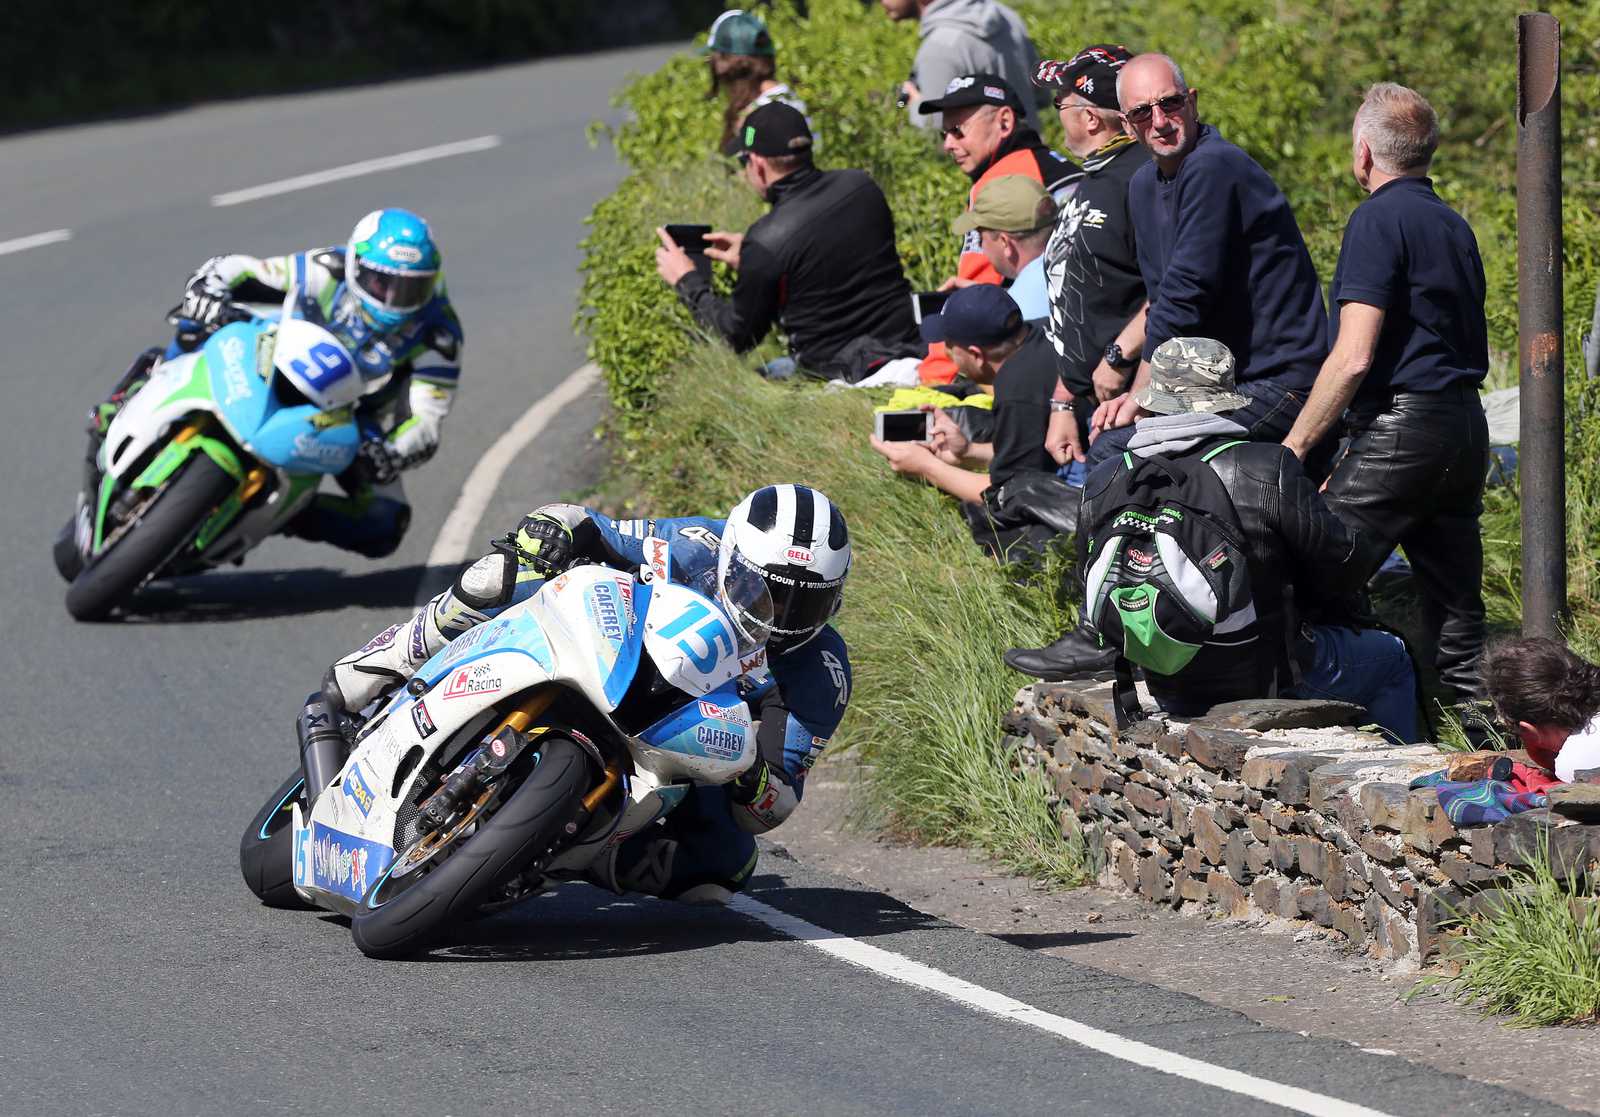 Isle Of Man TT: Tuesday's Racing Cancelled Due To Poor Weather